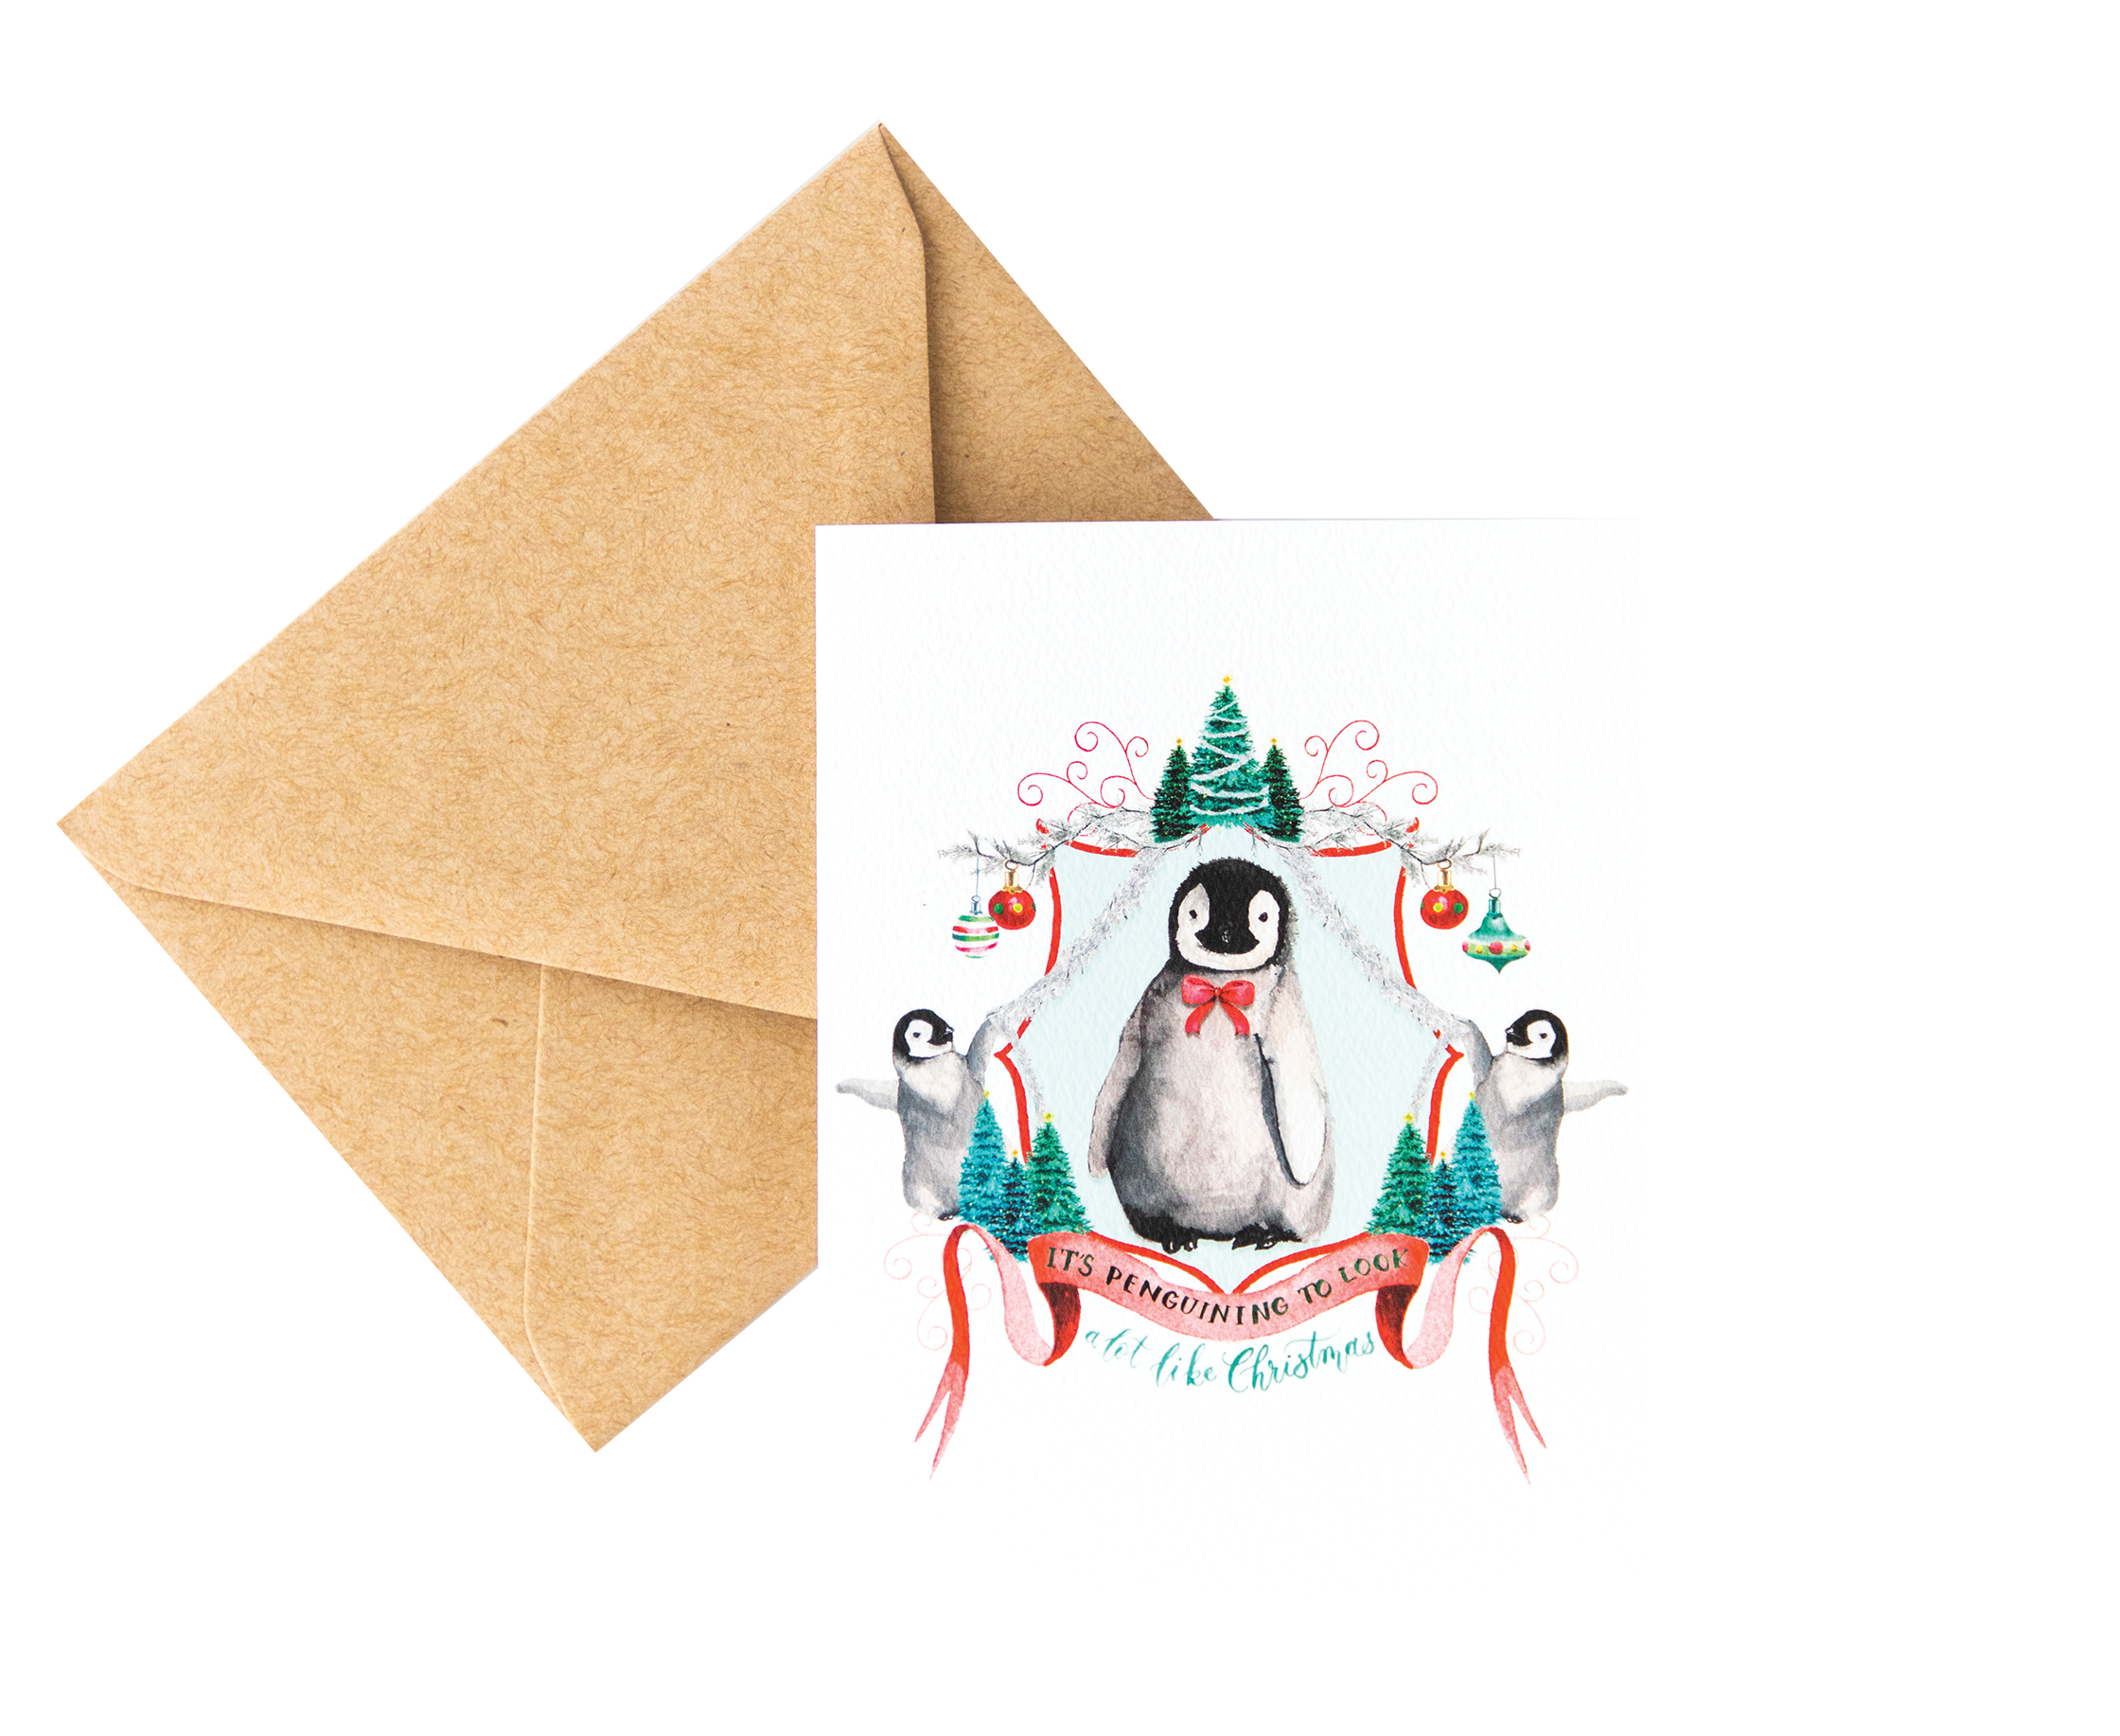 It’s Penguining to Look a Lot Like Christmas Card